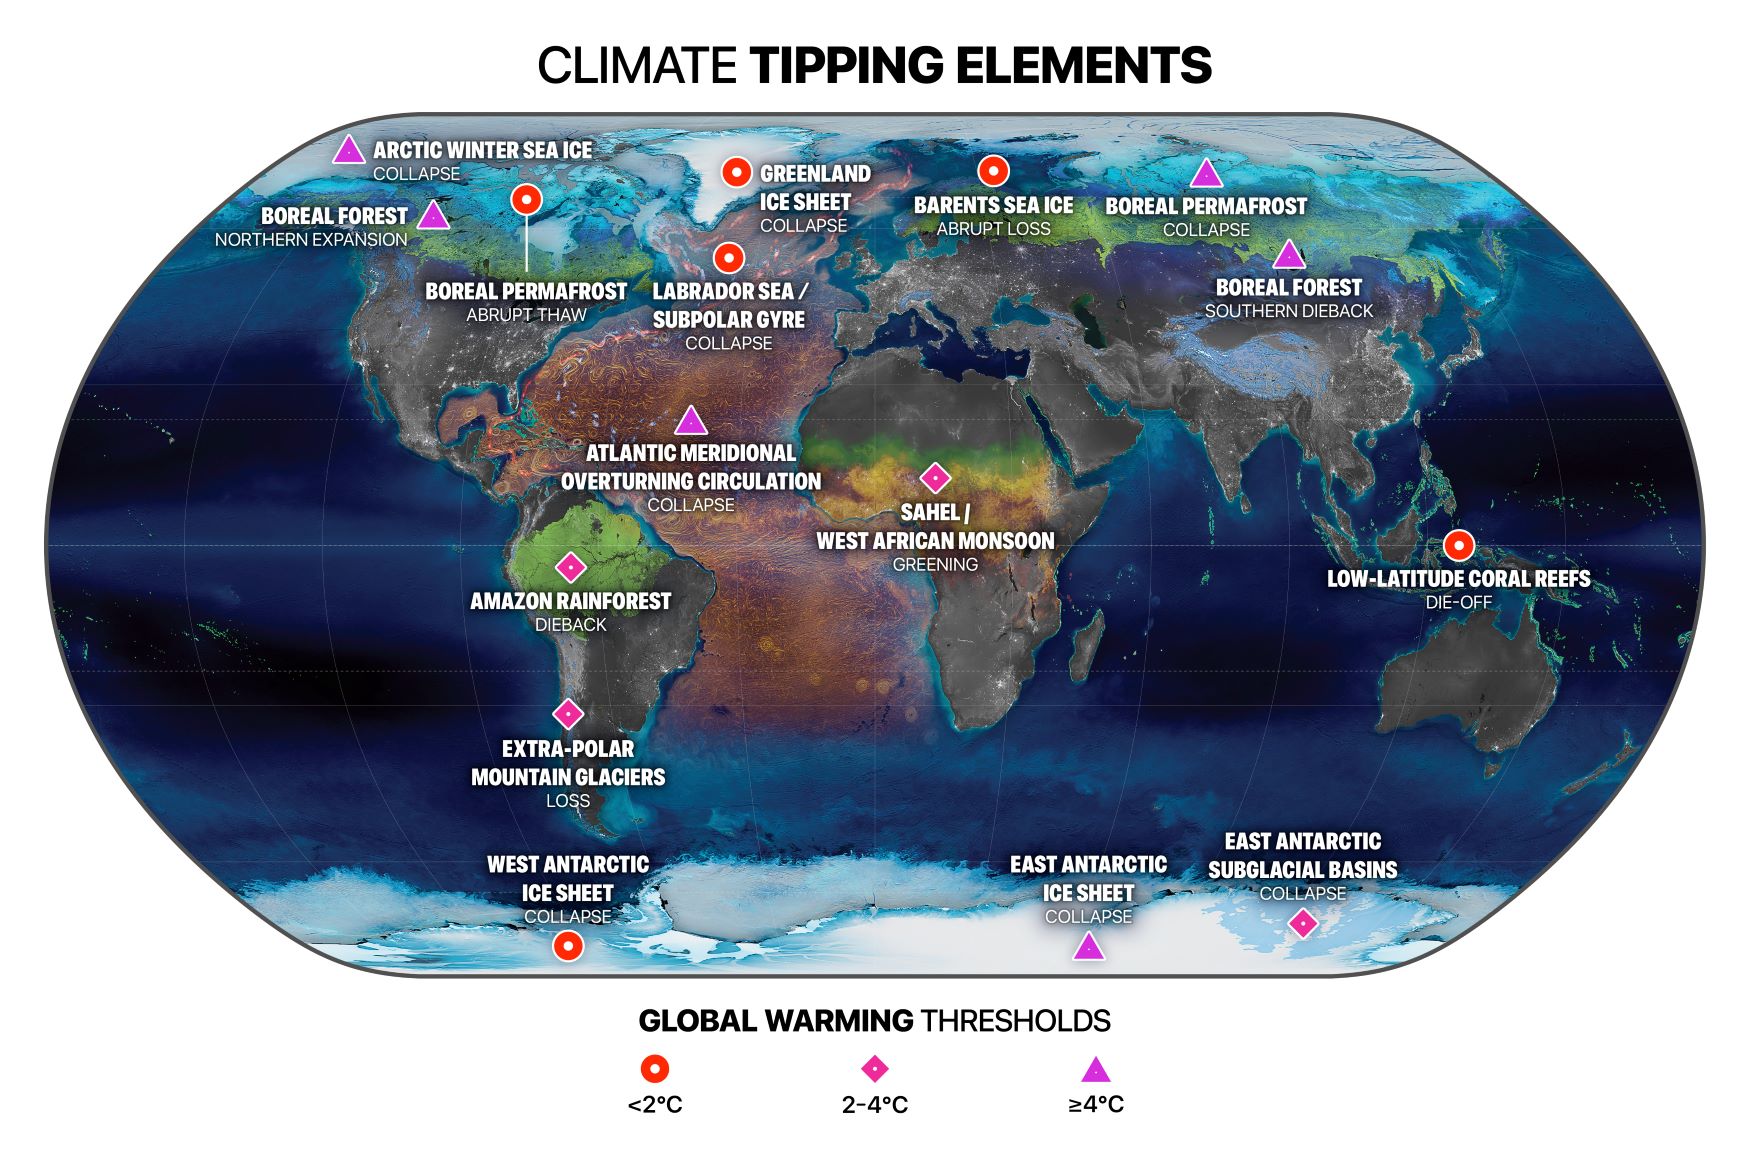 A map of areas that could be impacted by climate tipping points including the arctic winter sea ice, boreal permafrost, boreal forest, amazon rainforest, extra-polar mountain glaciers, west antarctic ice sheet, east antarctic ice sheet, east antarctic subglacial basins, low-latitude coral reefs, greenland ice sheet and barents sea ice.